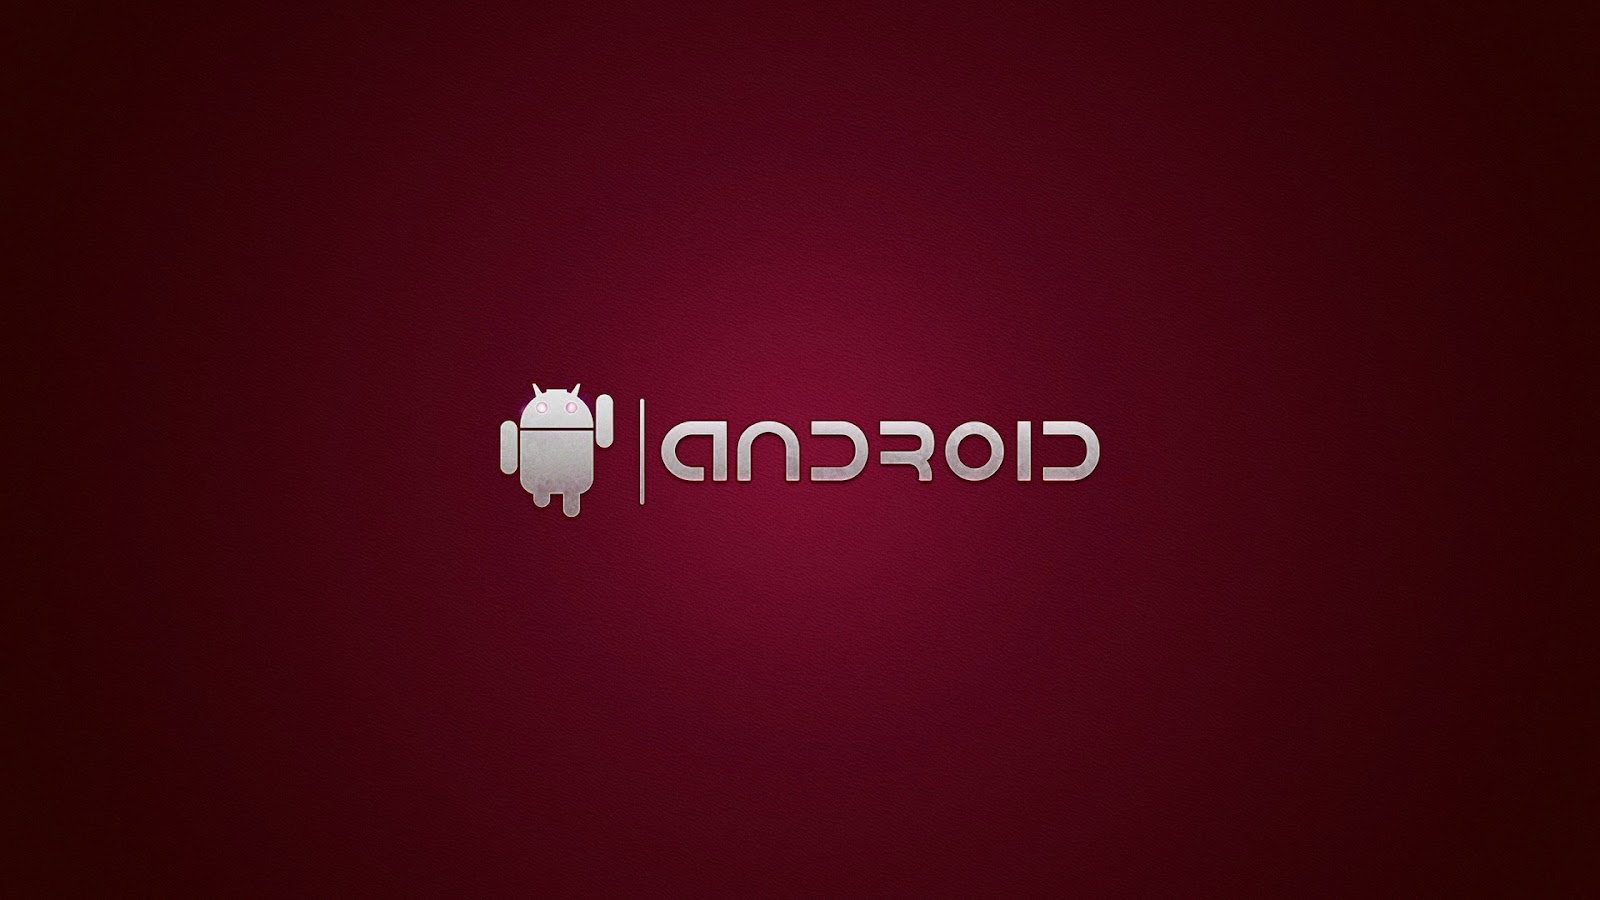 ... Android+Backgrounds_My-Galaxy-S3-Wallpaper-+Background-HD-Android.jpg